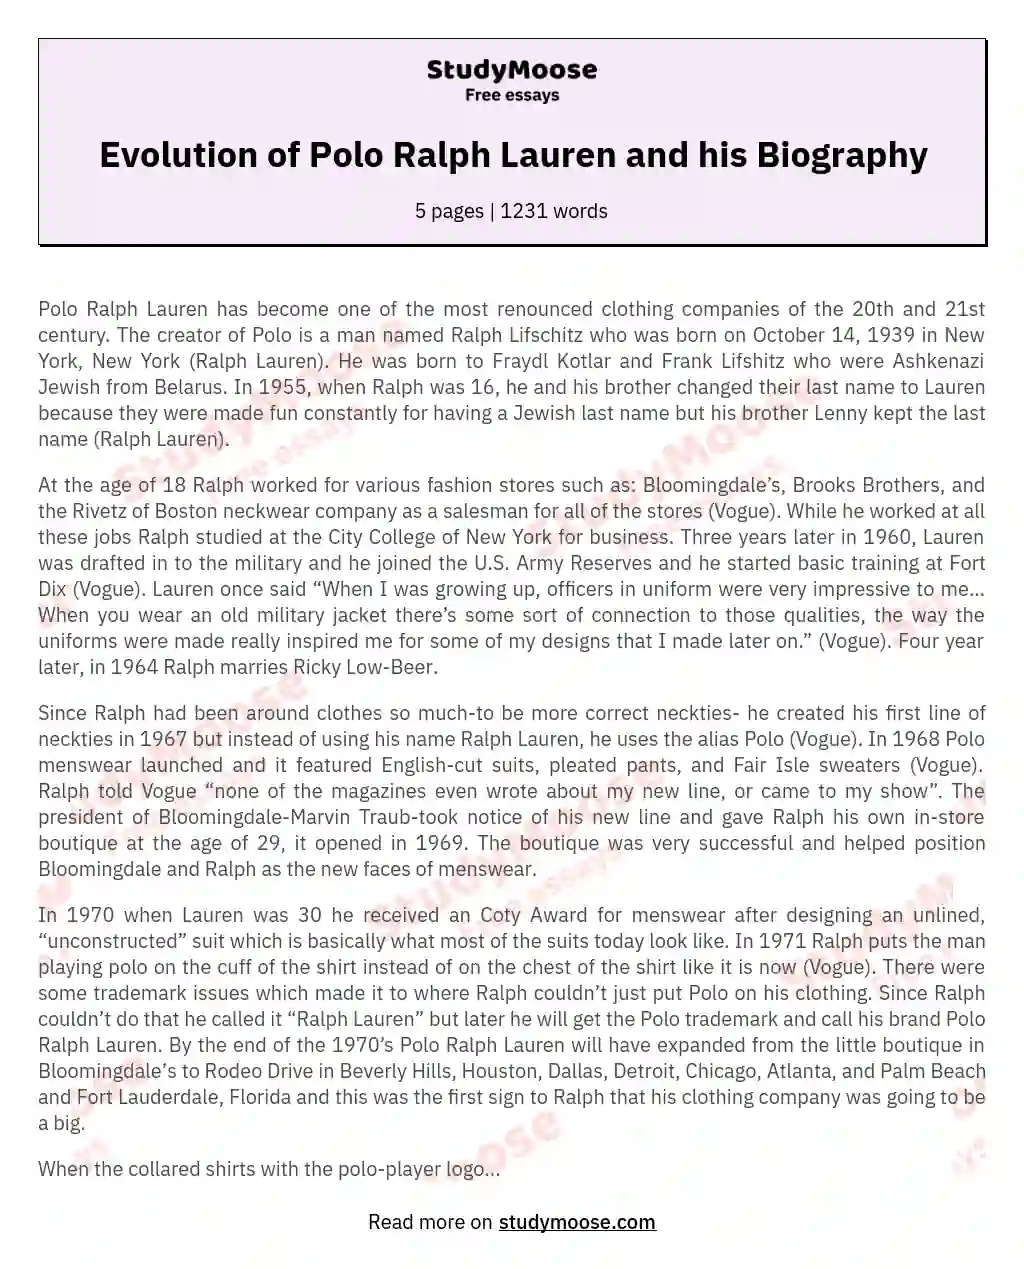 Evolution of Polo Ralph Lauren and his Biography essay